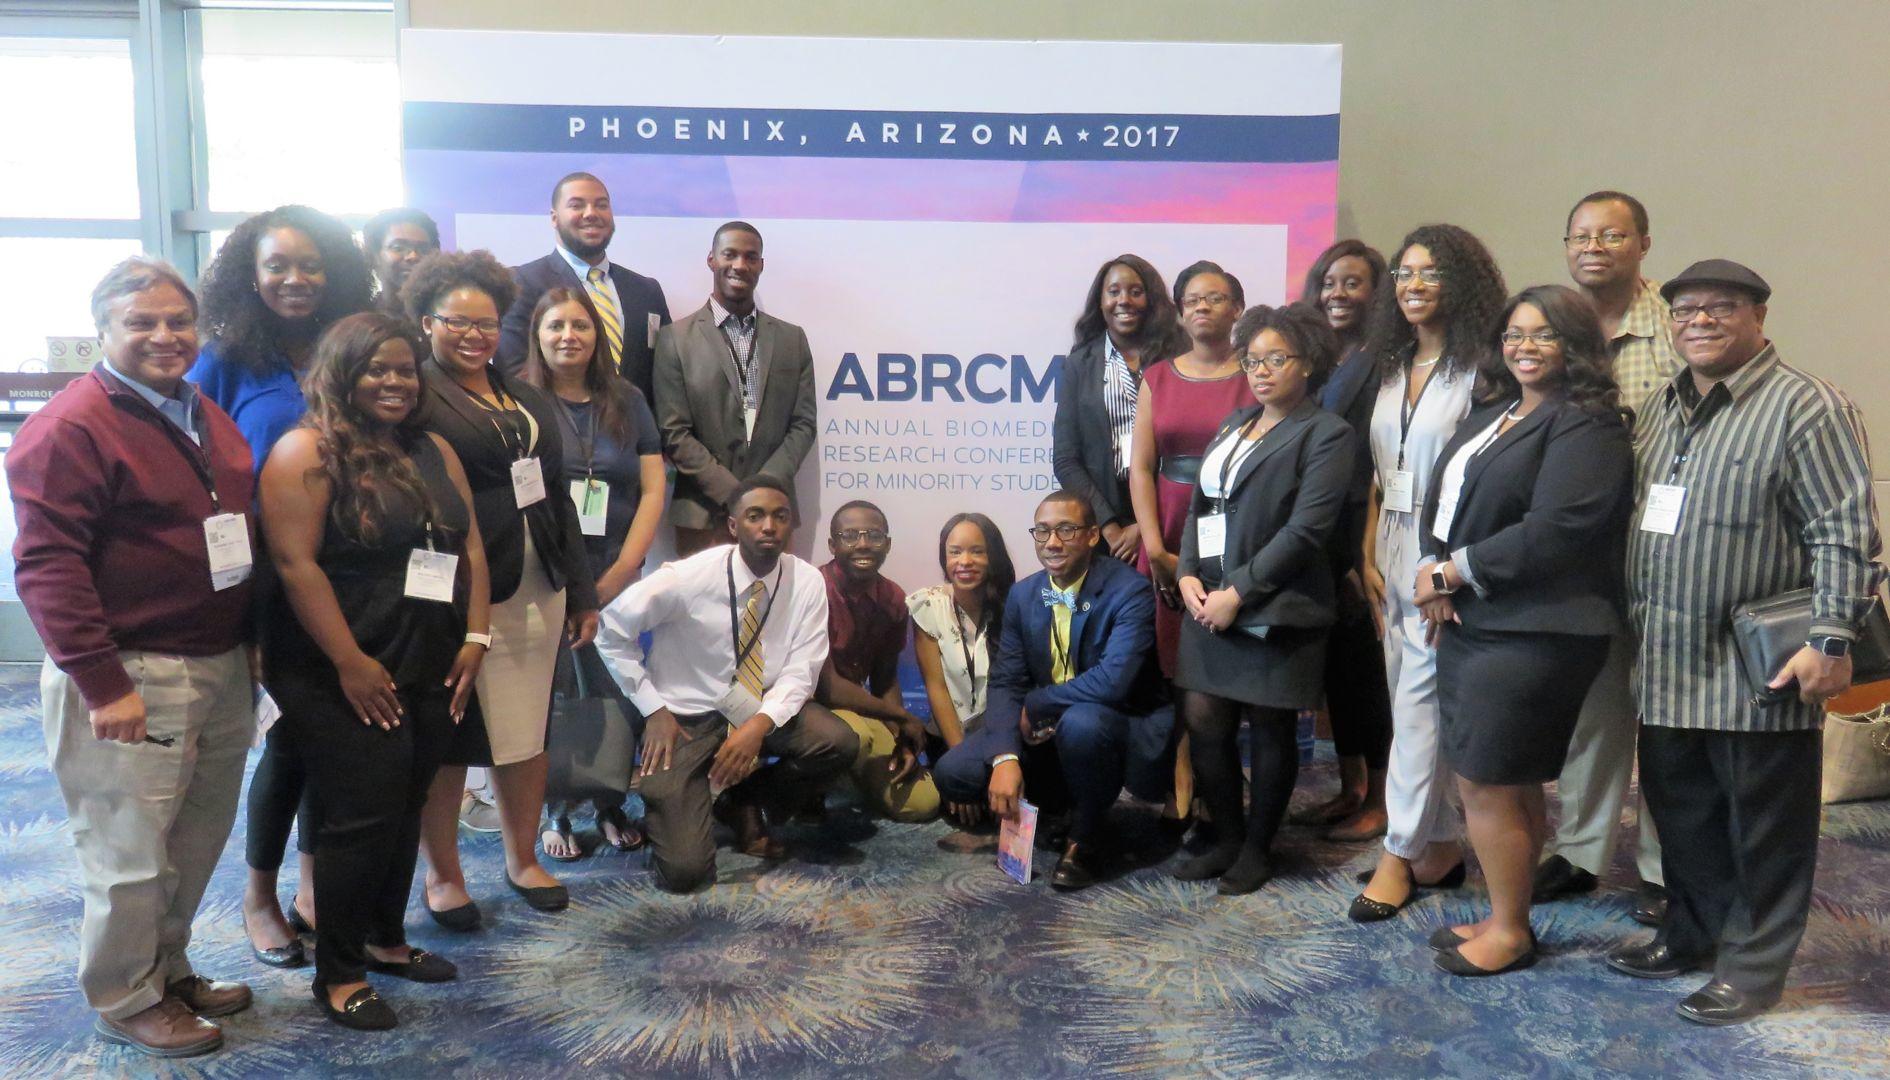 Sixteen students and five faculty members from Fort Valley State University pose for a photo while attending the Annual Biomedical Research Conference for Minority Students (ABRCMS) in Phoenix, Arizona.